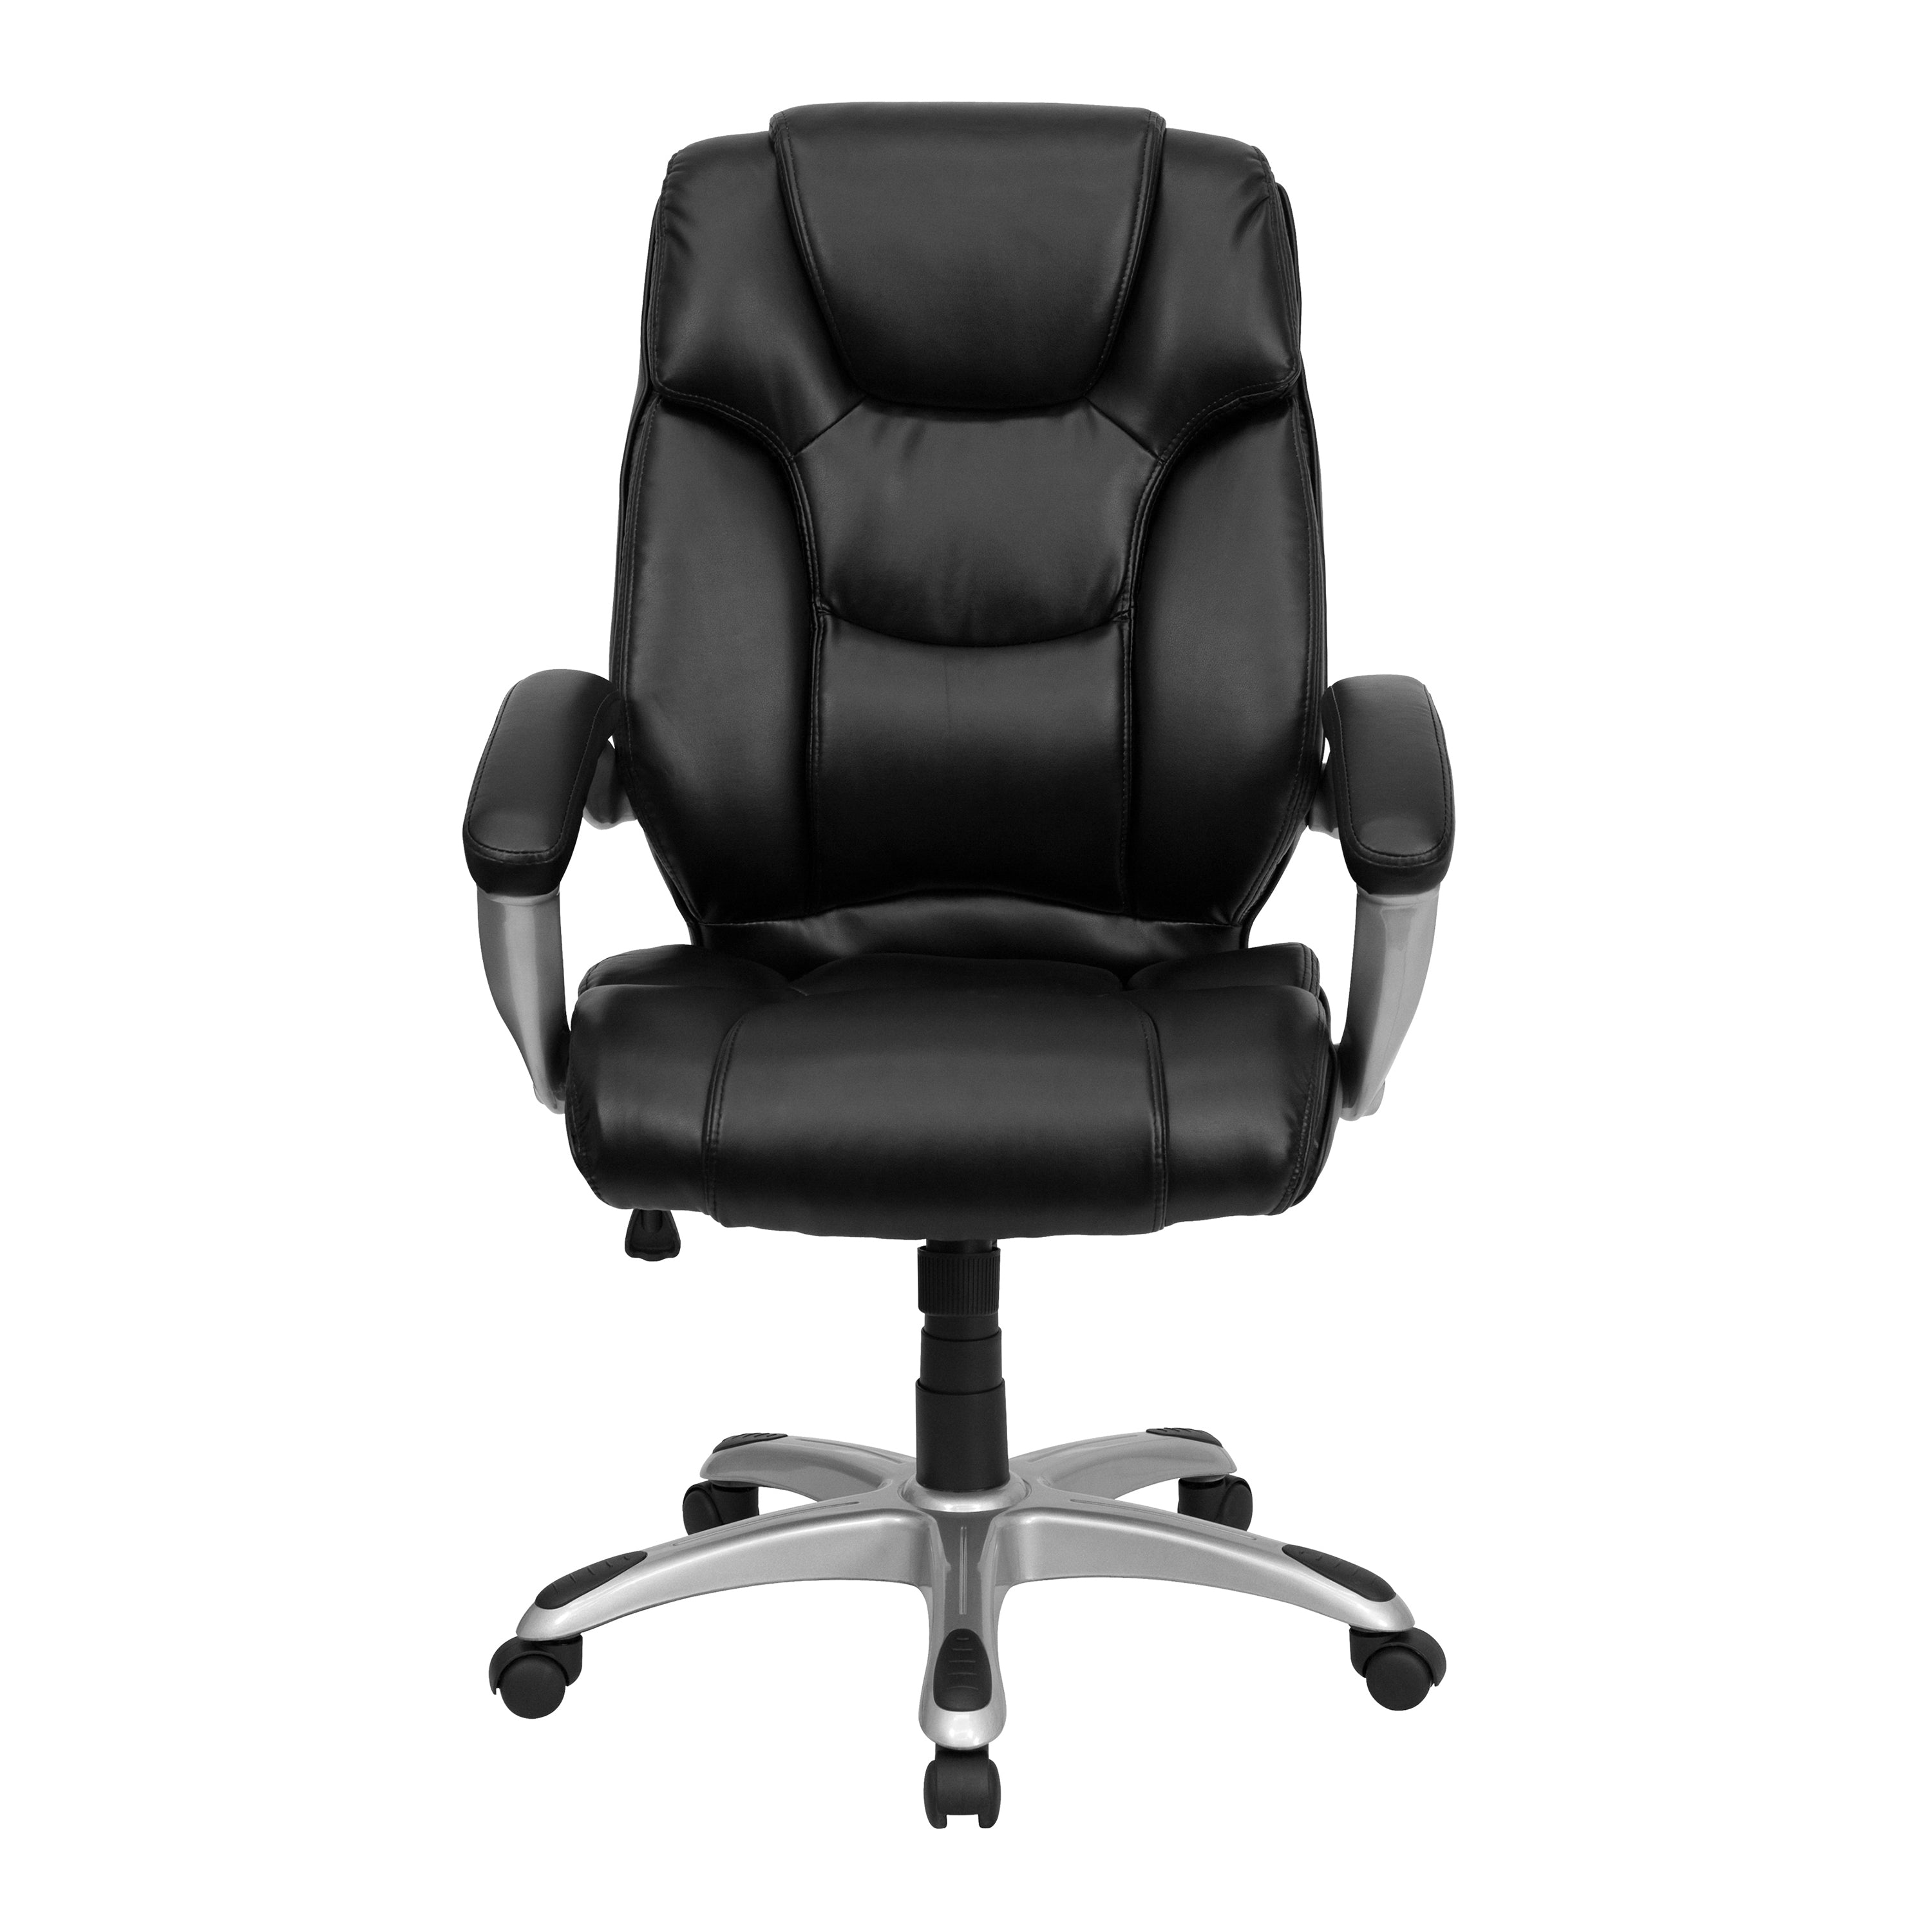 High Back LeatherSoft Layered Upholstered Executive Swivel Ergonomic Office Chair with Silver Nylon Base and Arms-Office Chair-Flash Furniture-Wall2Wall Furnishings